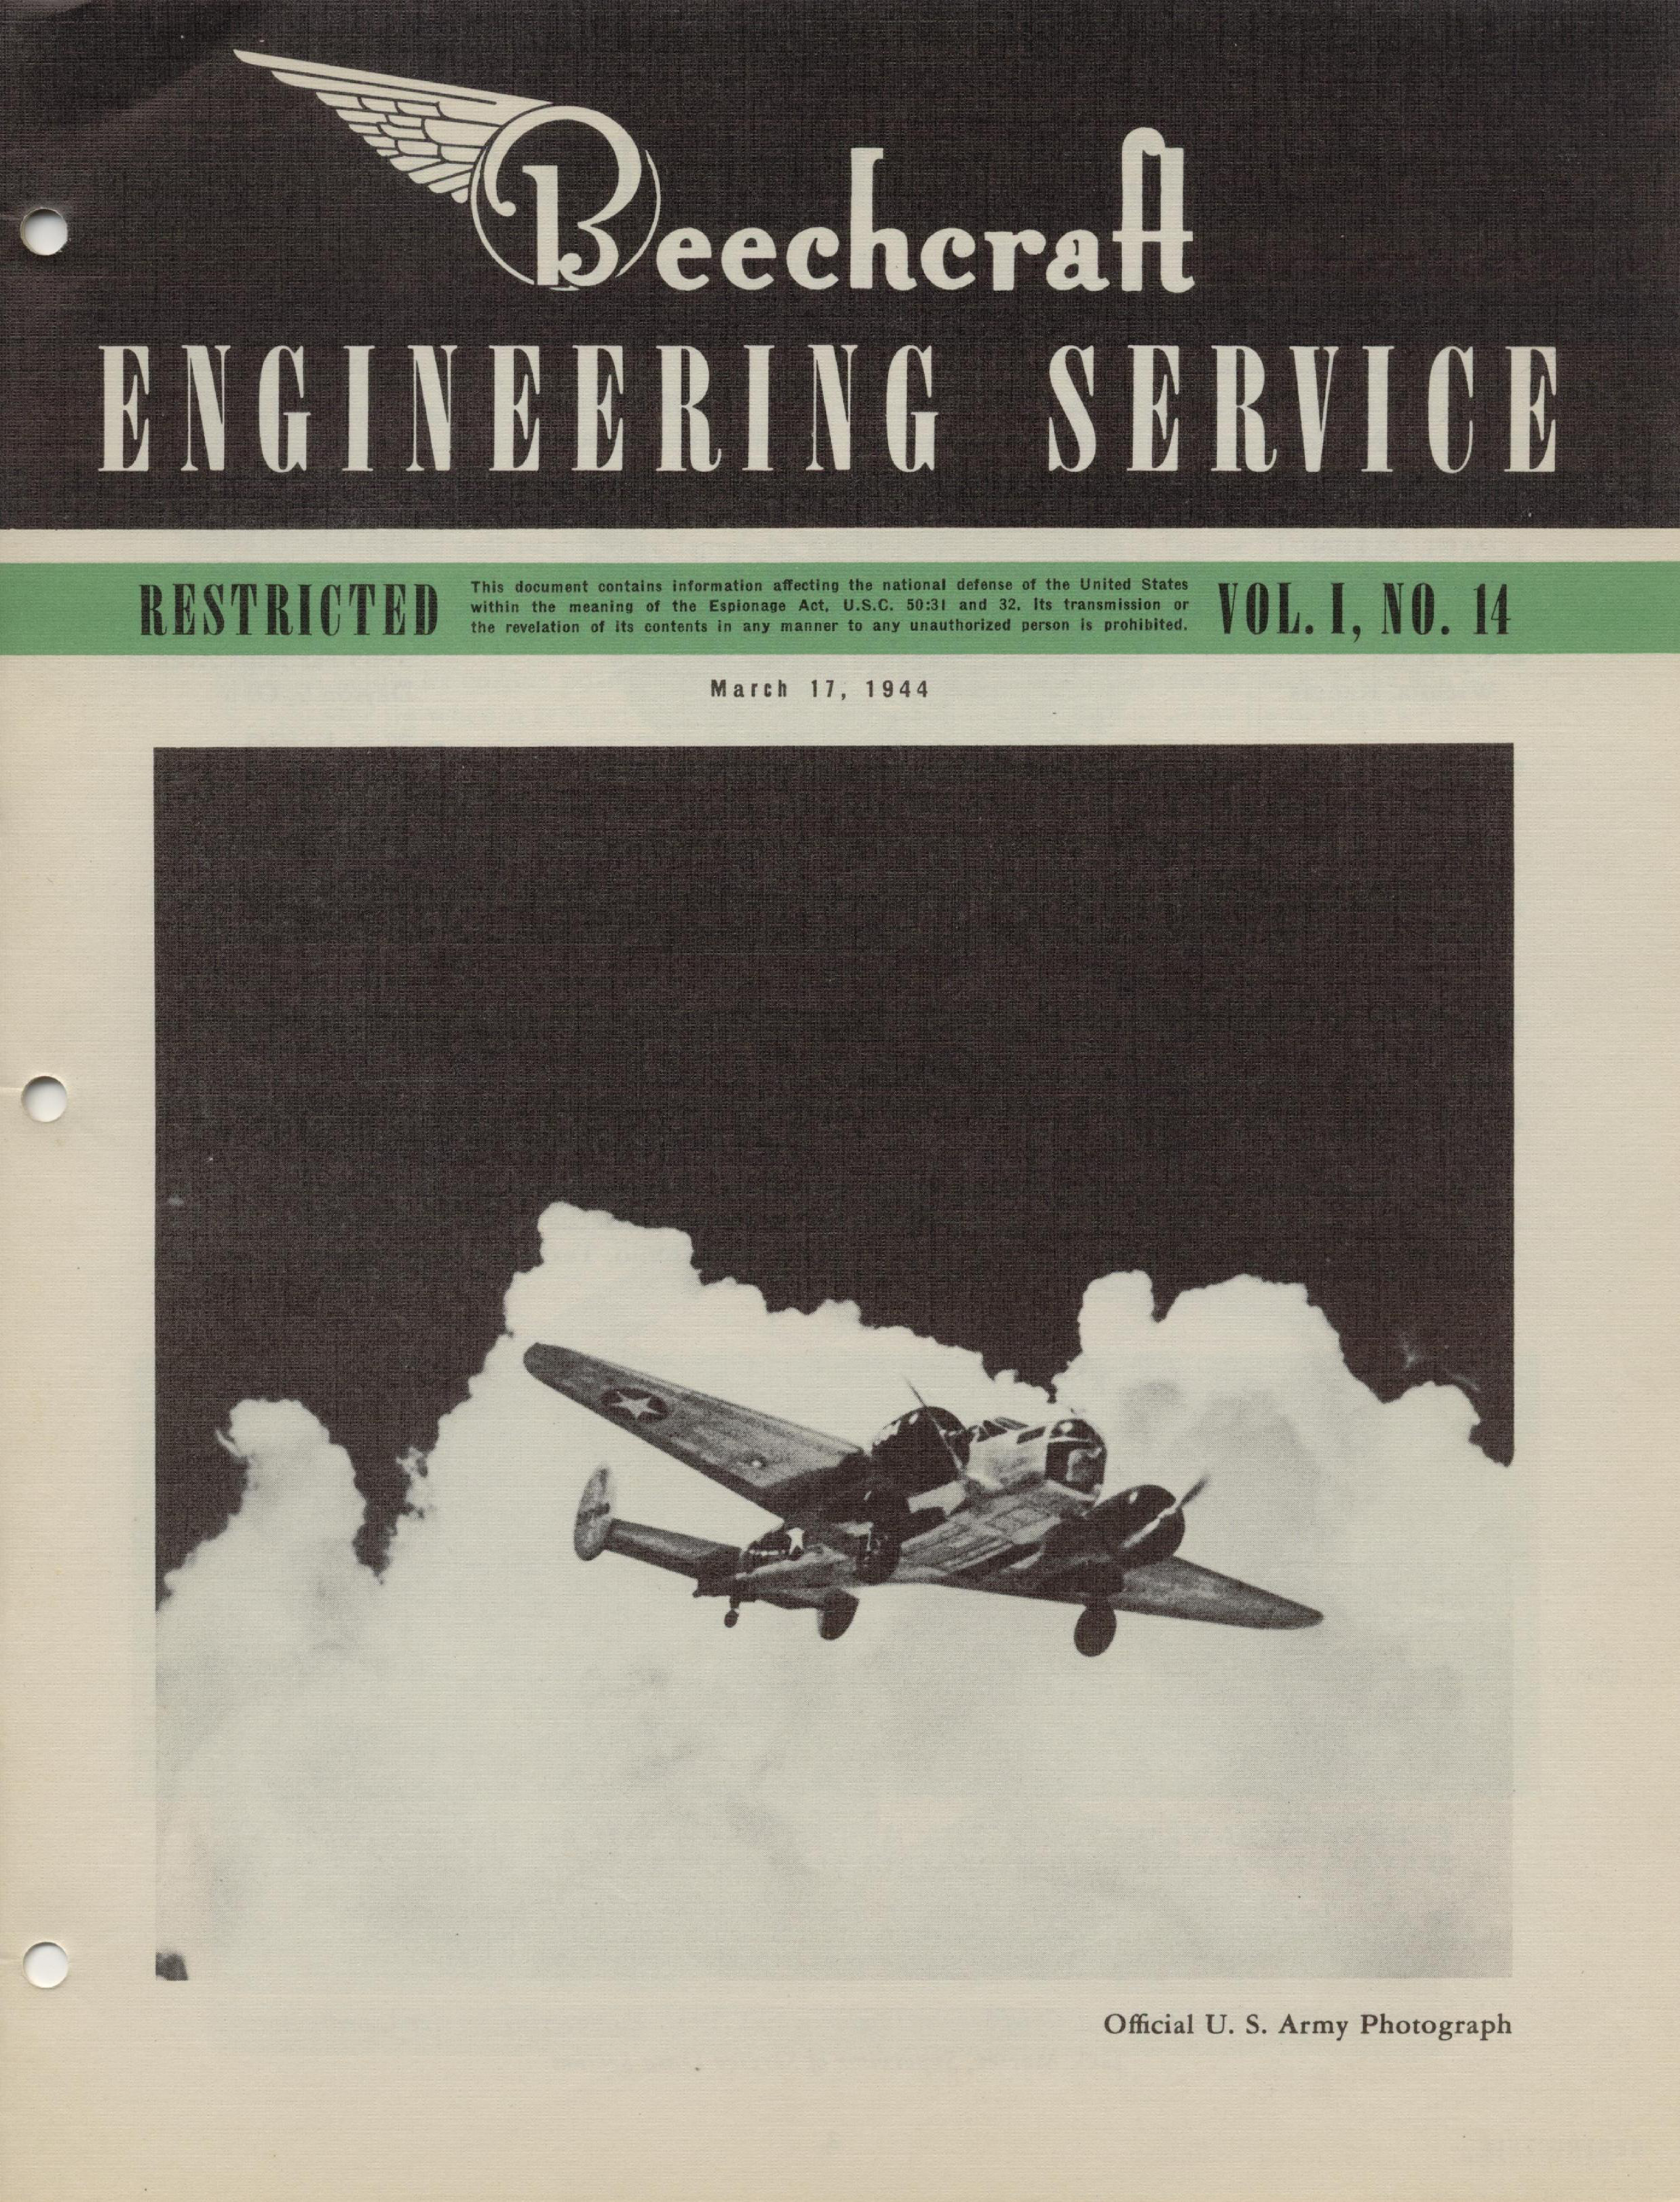 Sample page 1 from AirCorps Library document: Vol. I, No. 14 - Beechcraft Engineering Service